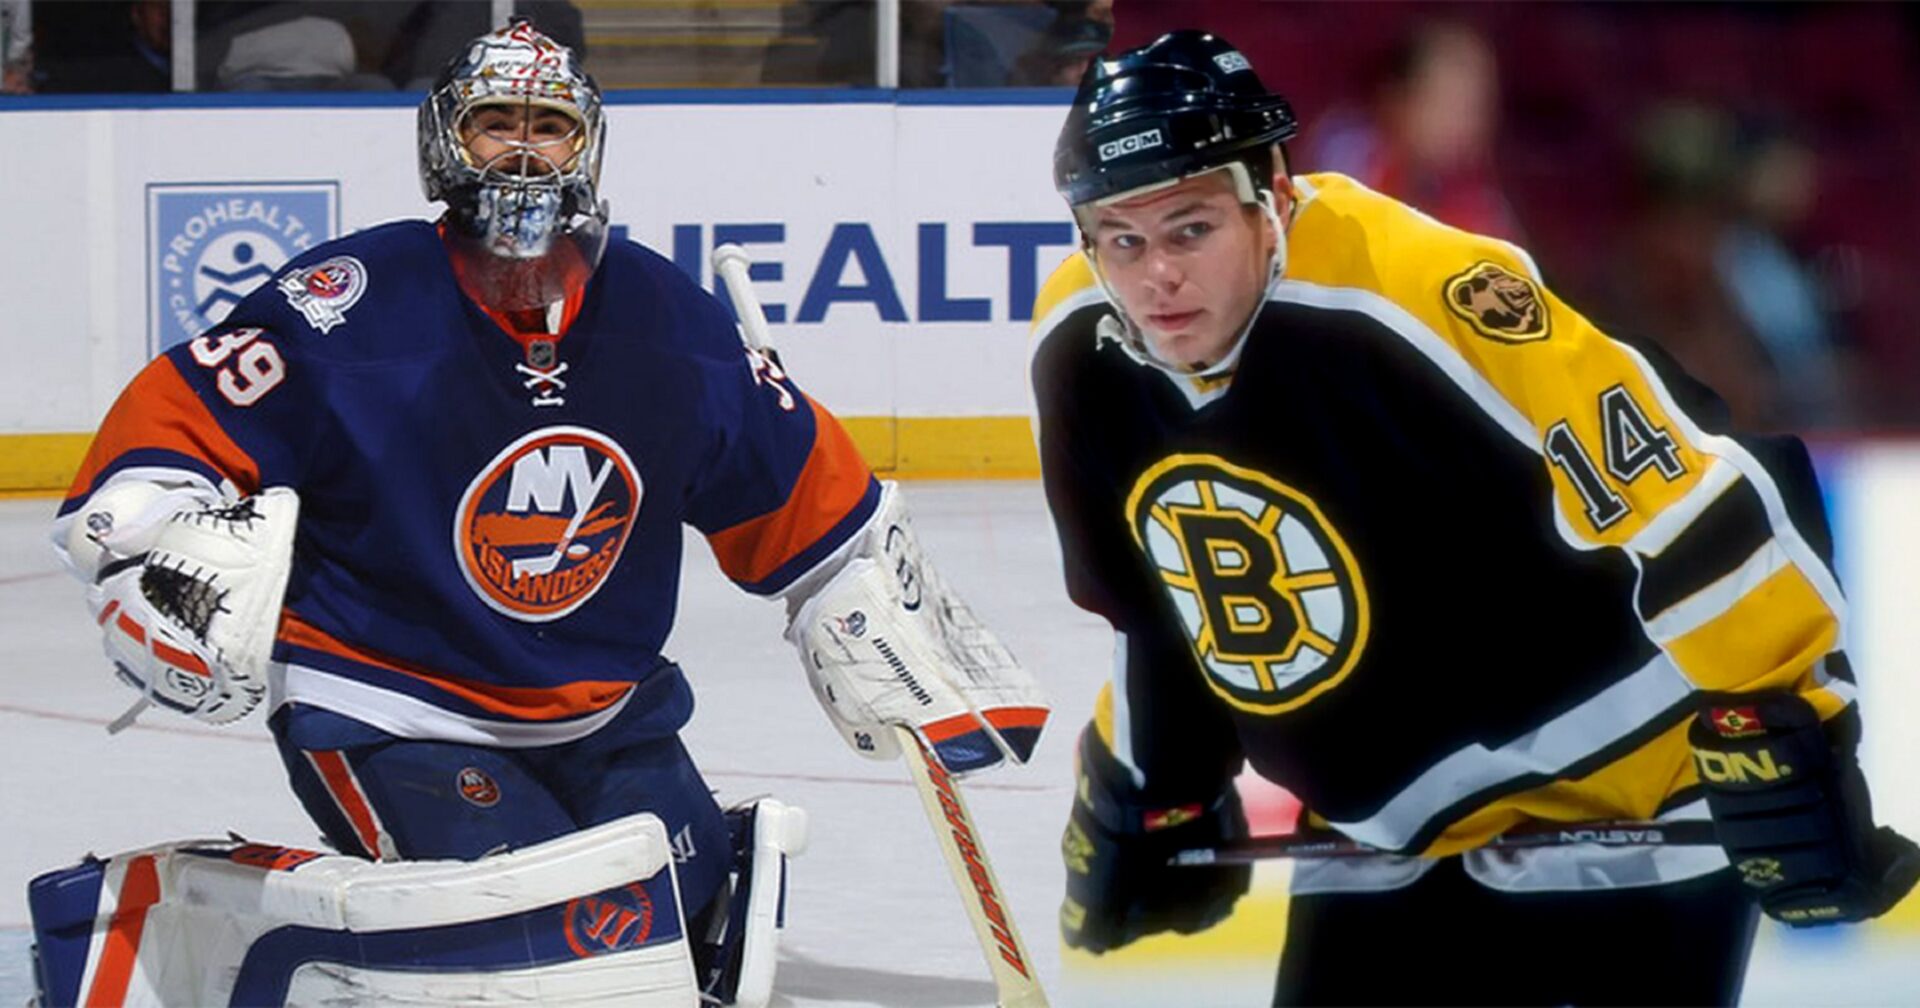 This Day In Hockey History-June 23, 2002-Islanders try to trade DiPietro for Samsonov